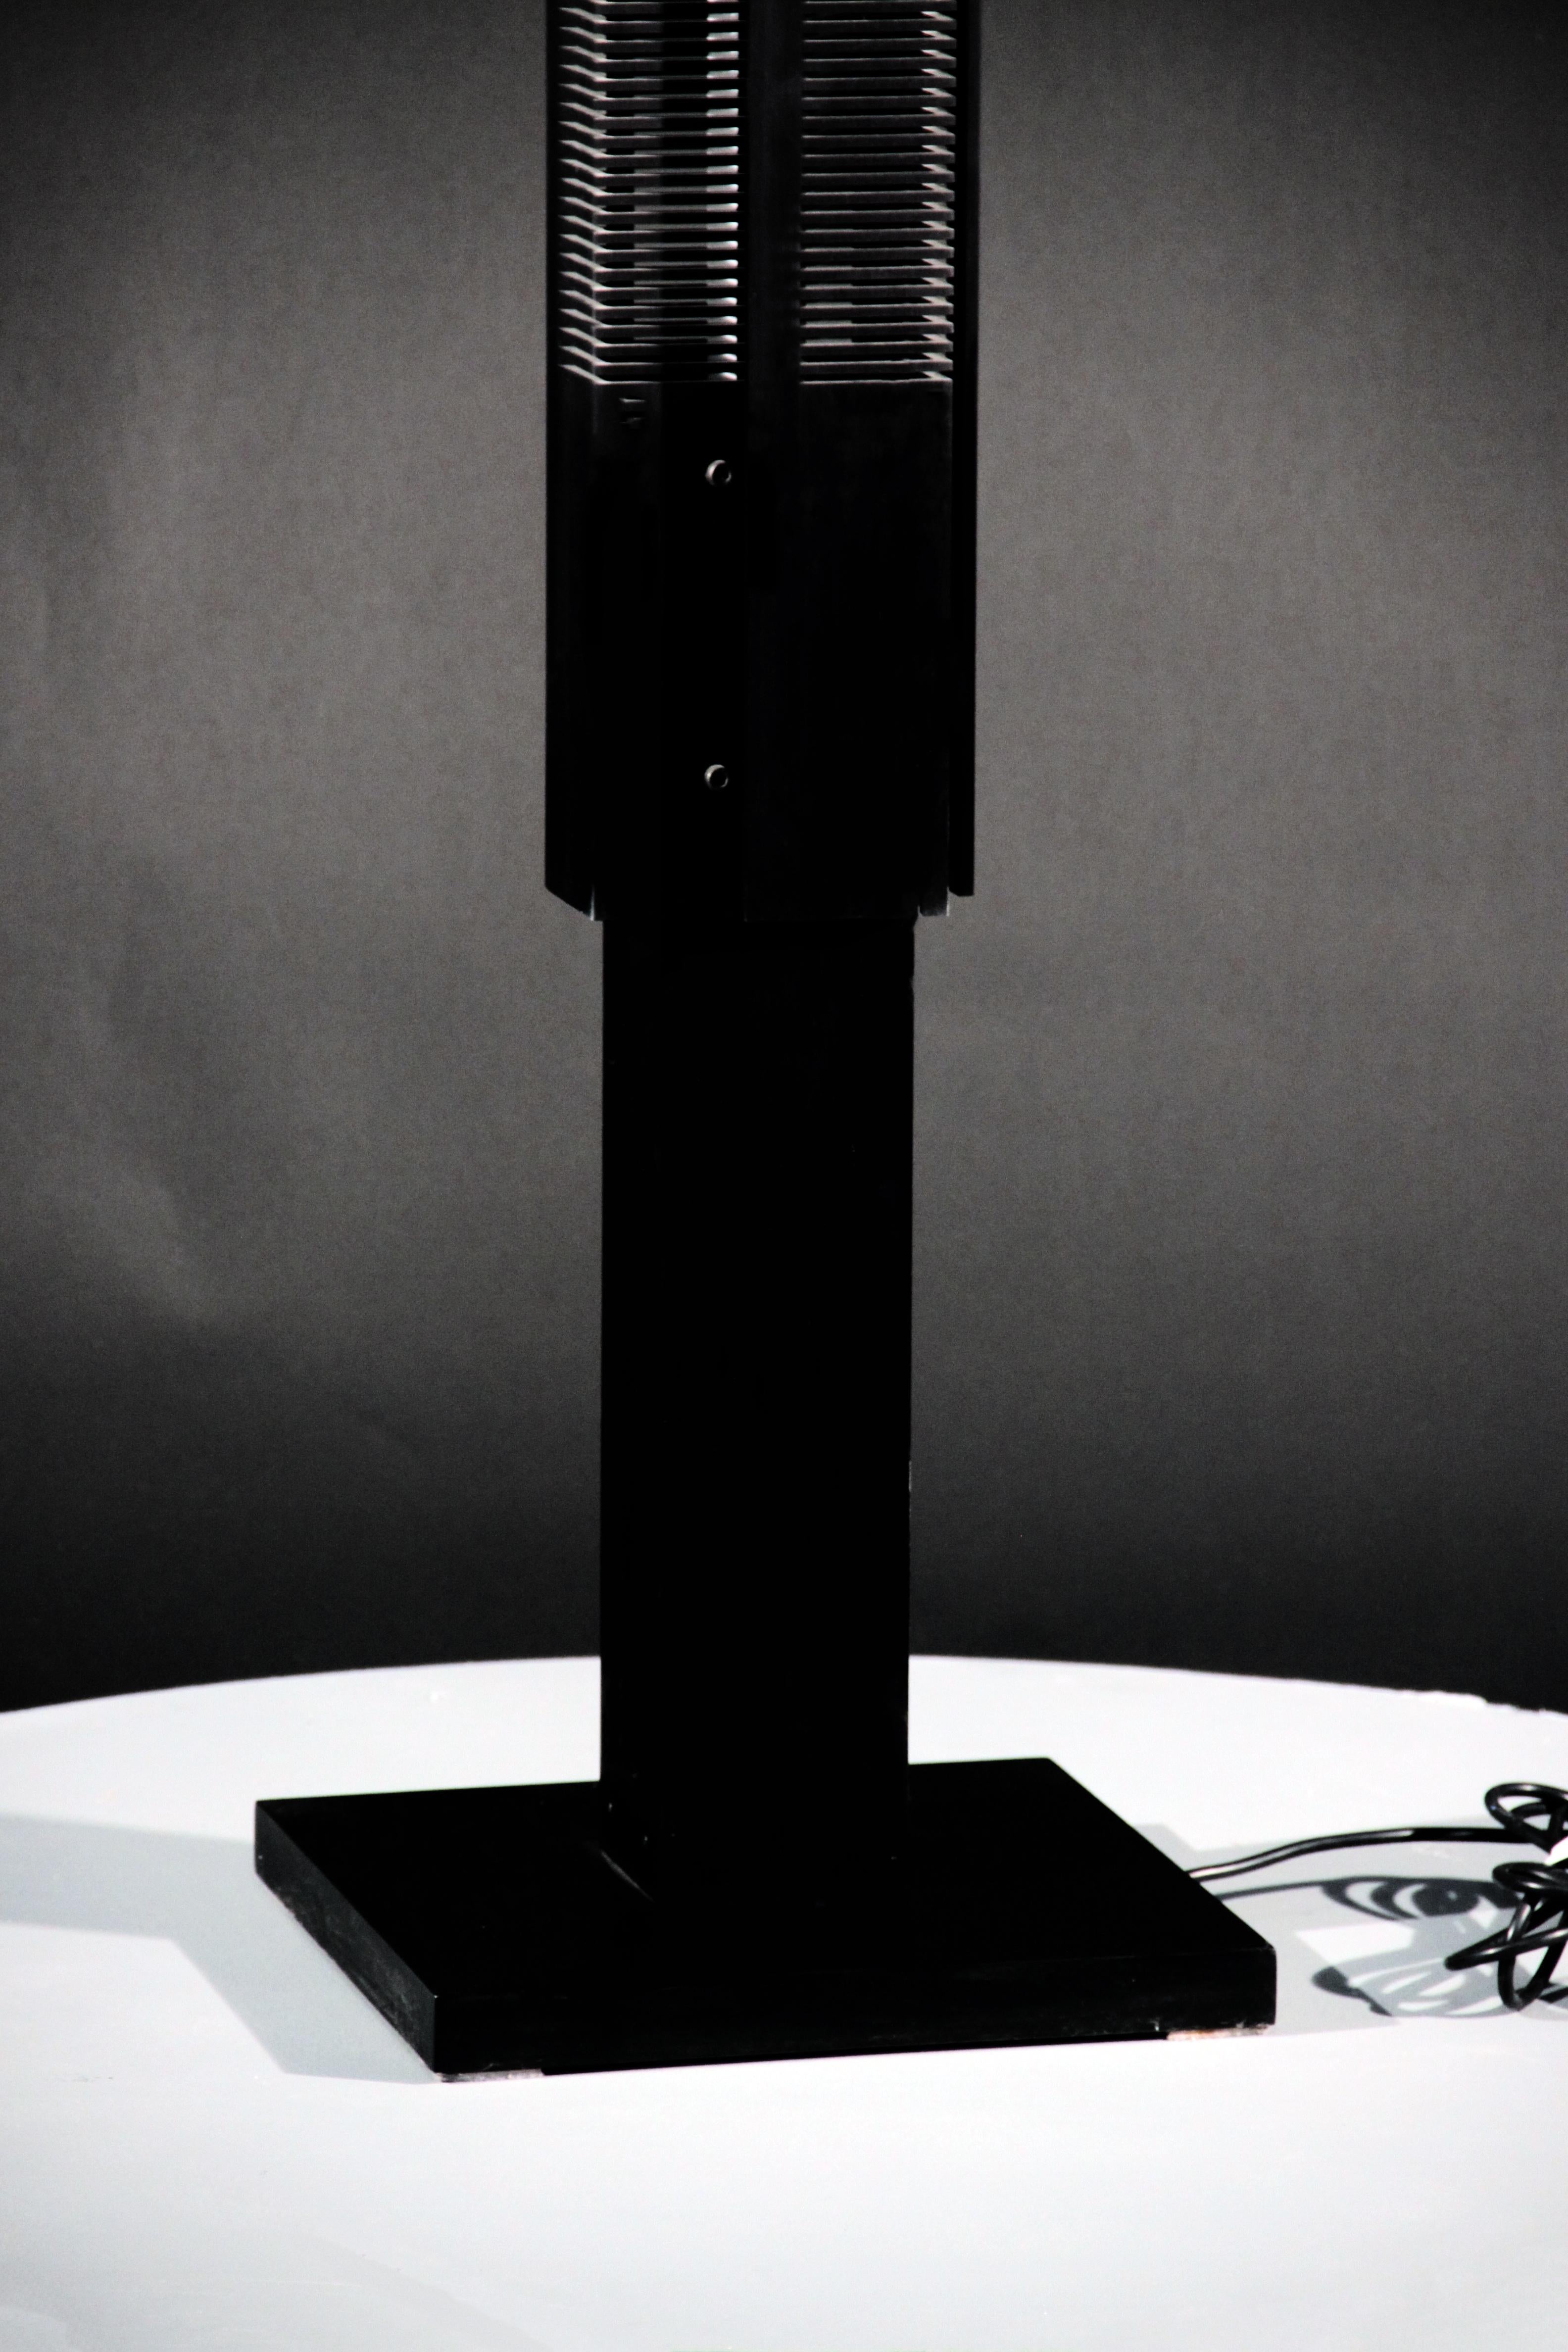 Serge Mouille - Extra Large Signal Floor Lamp in Black In New Condition For Sale In Stratford, CT